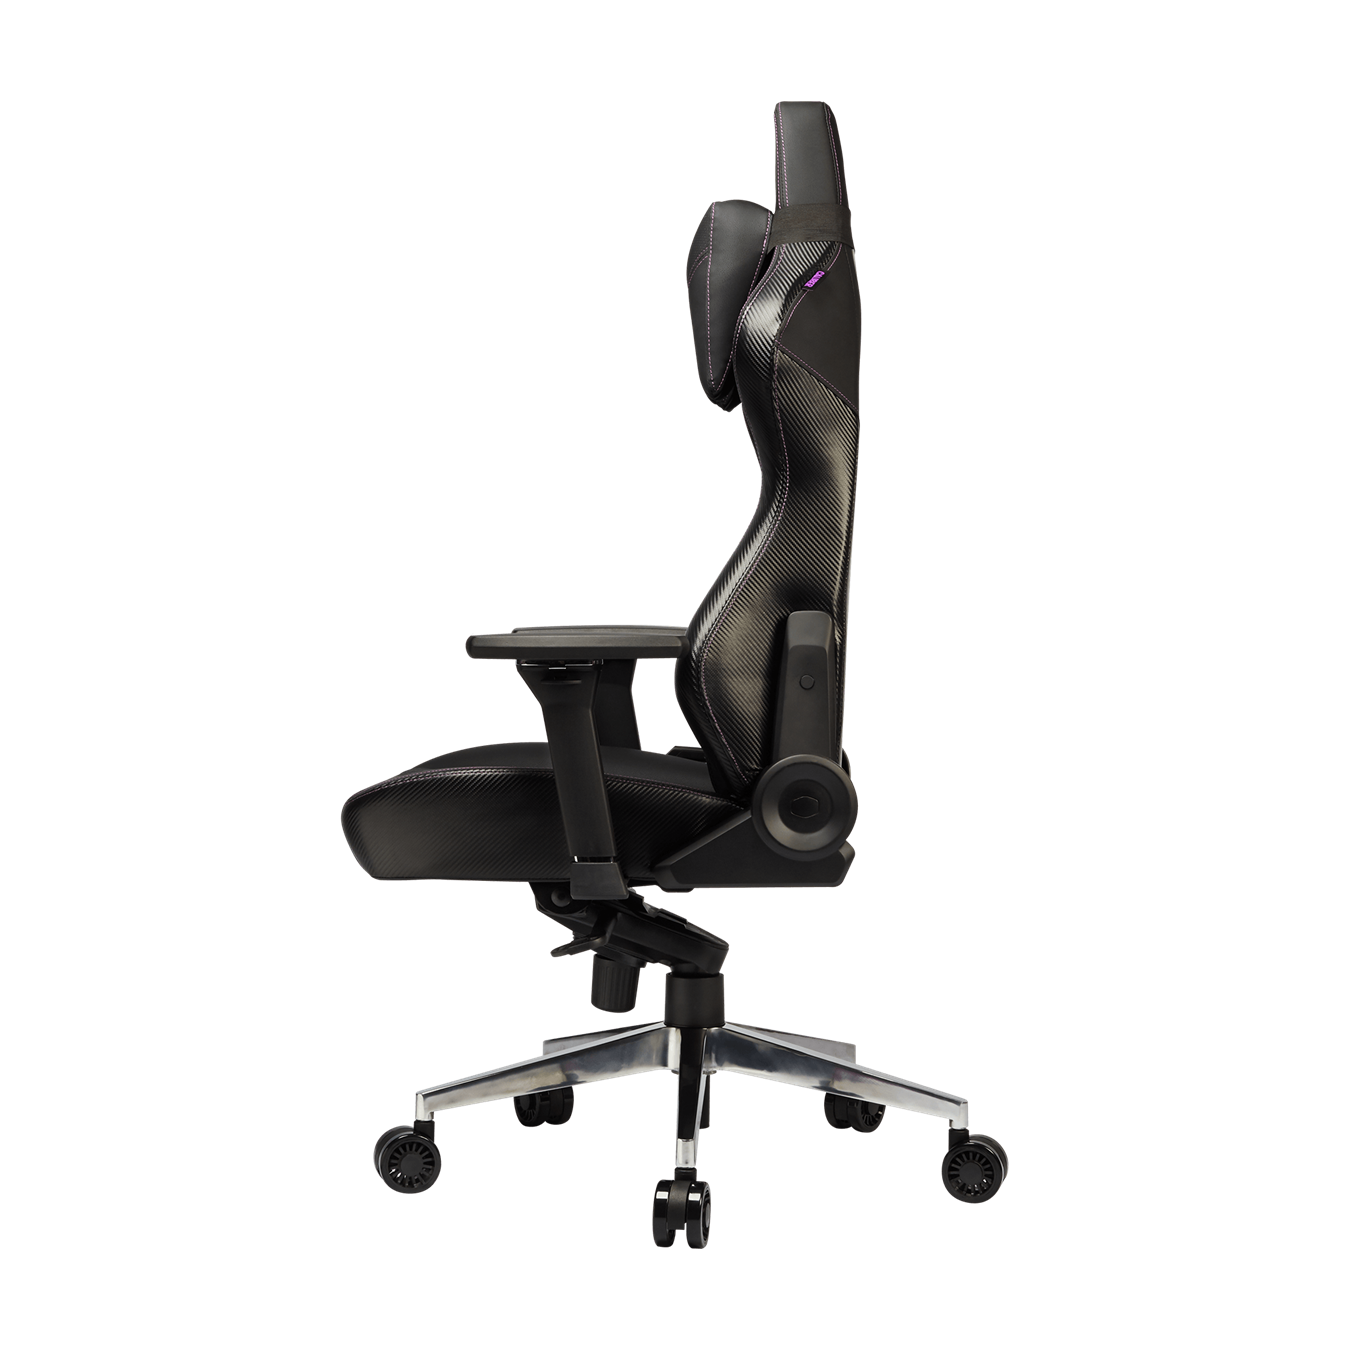 COOLER MASTER CALIBER X1 GAMING CHAIR, DESIGNED FOR ULTRA COMFORT AND STYLE, LARGE SIZE, A